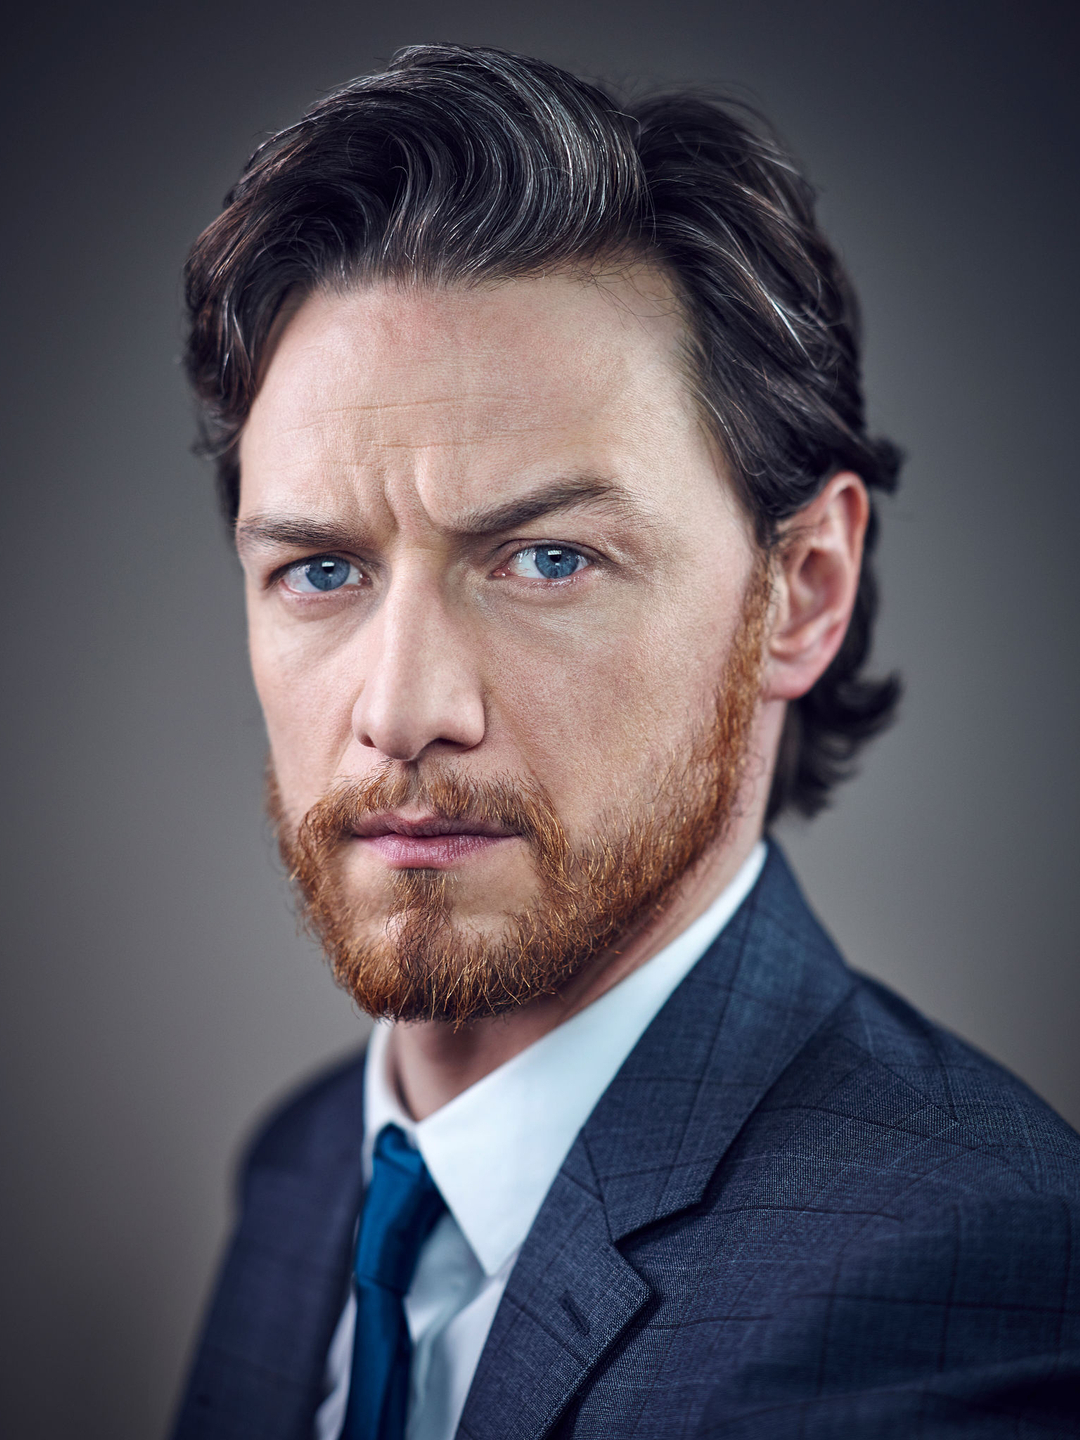 James McAvoy who are his parents